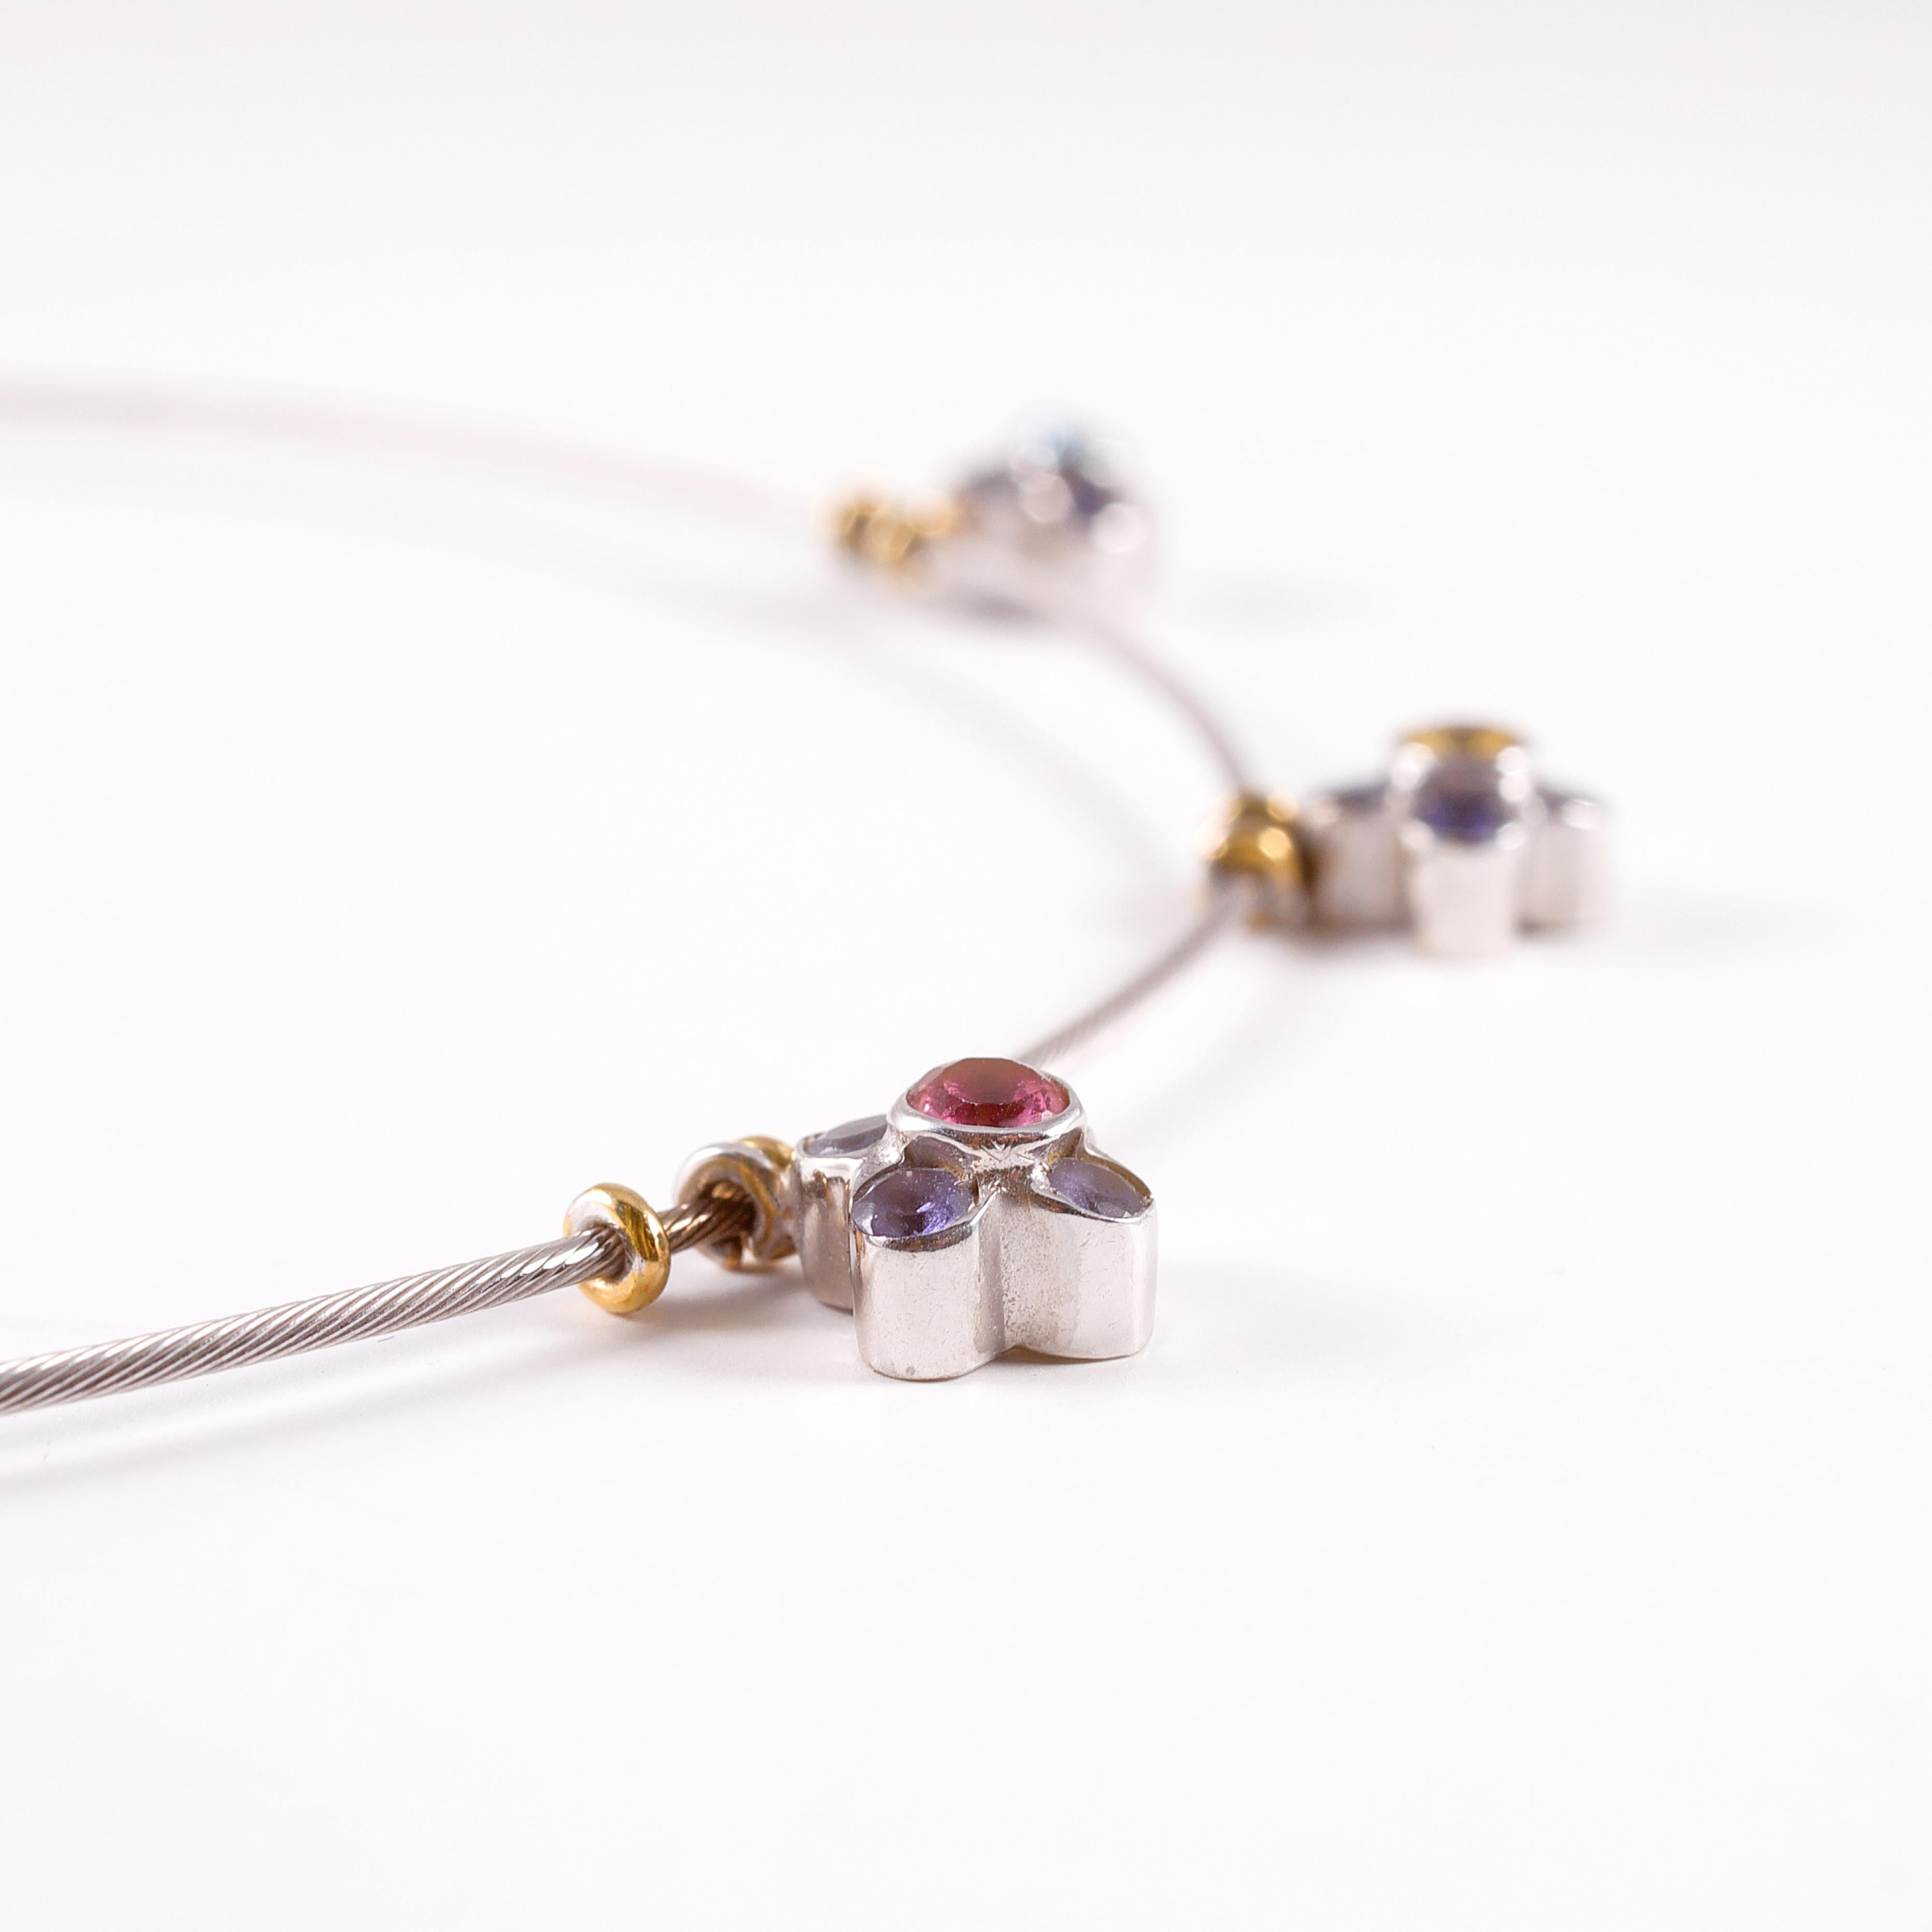 Fun and light!  These three small fixed flowers support one each pink tourmaline, yellow sapphire and blue topaz stones.  